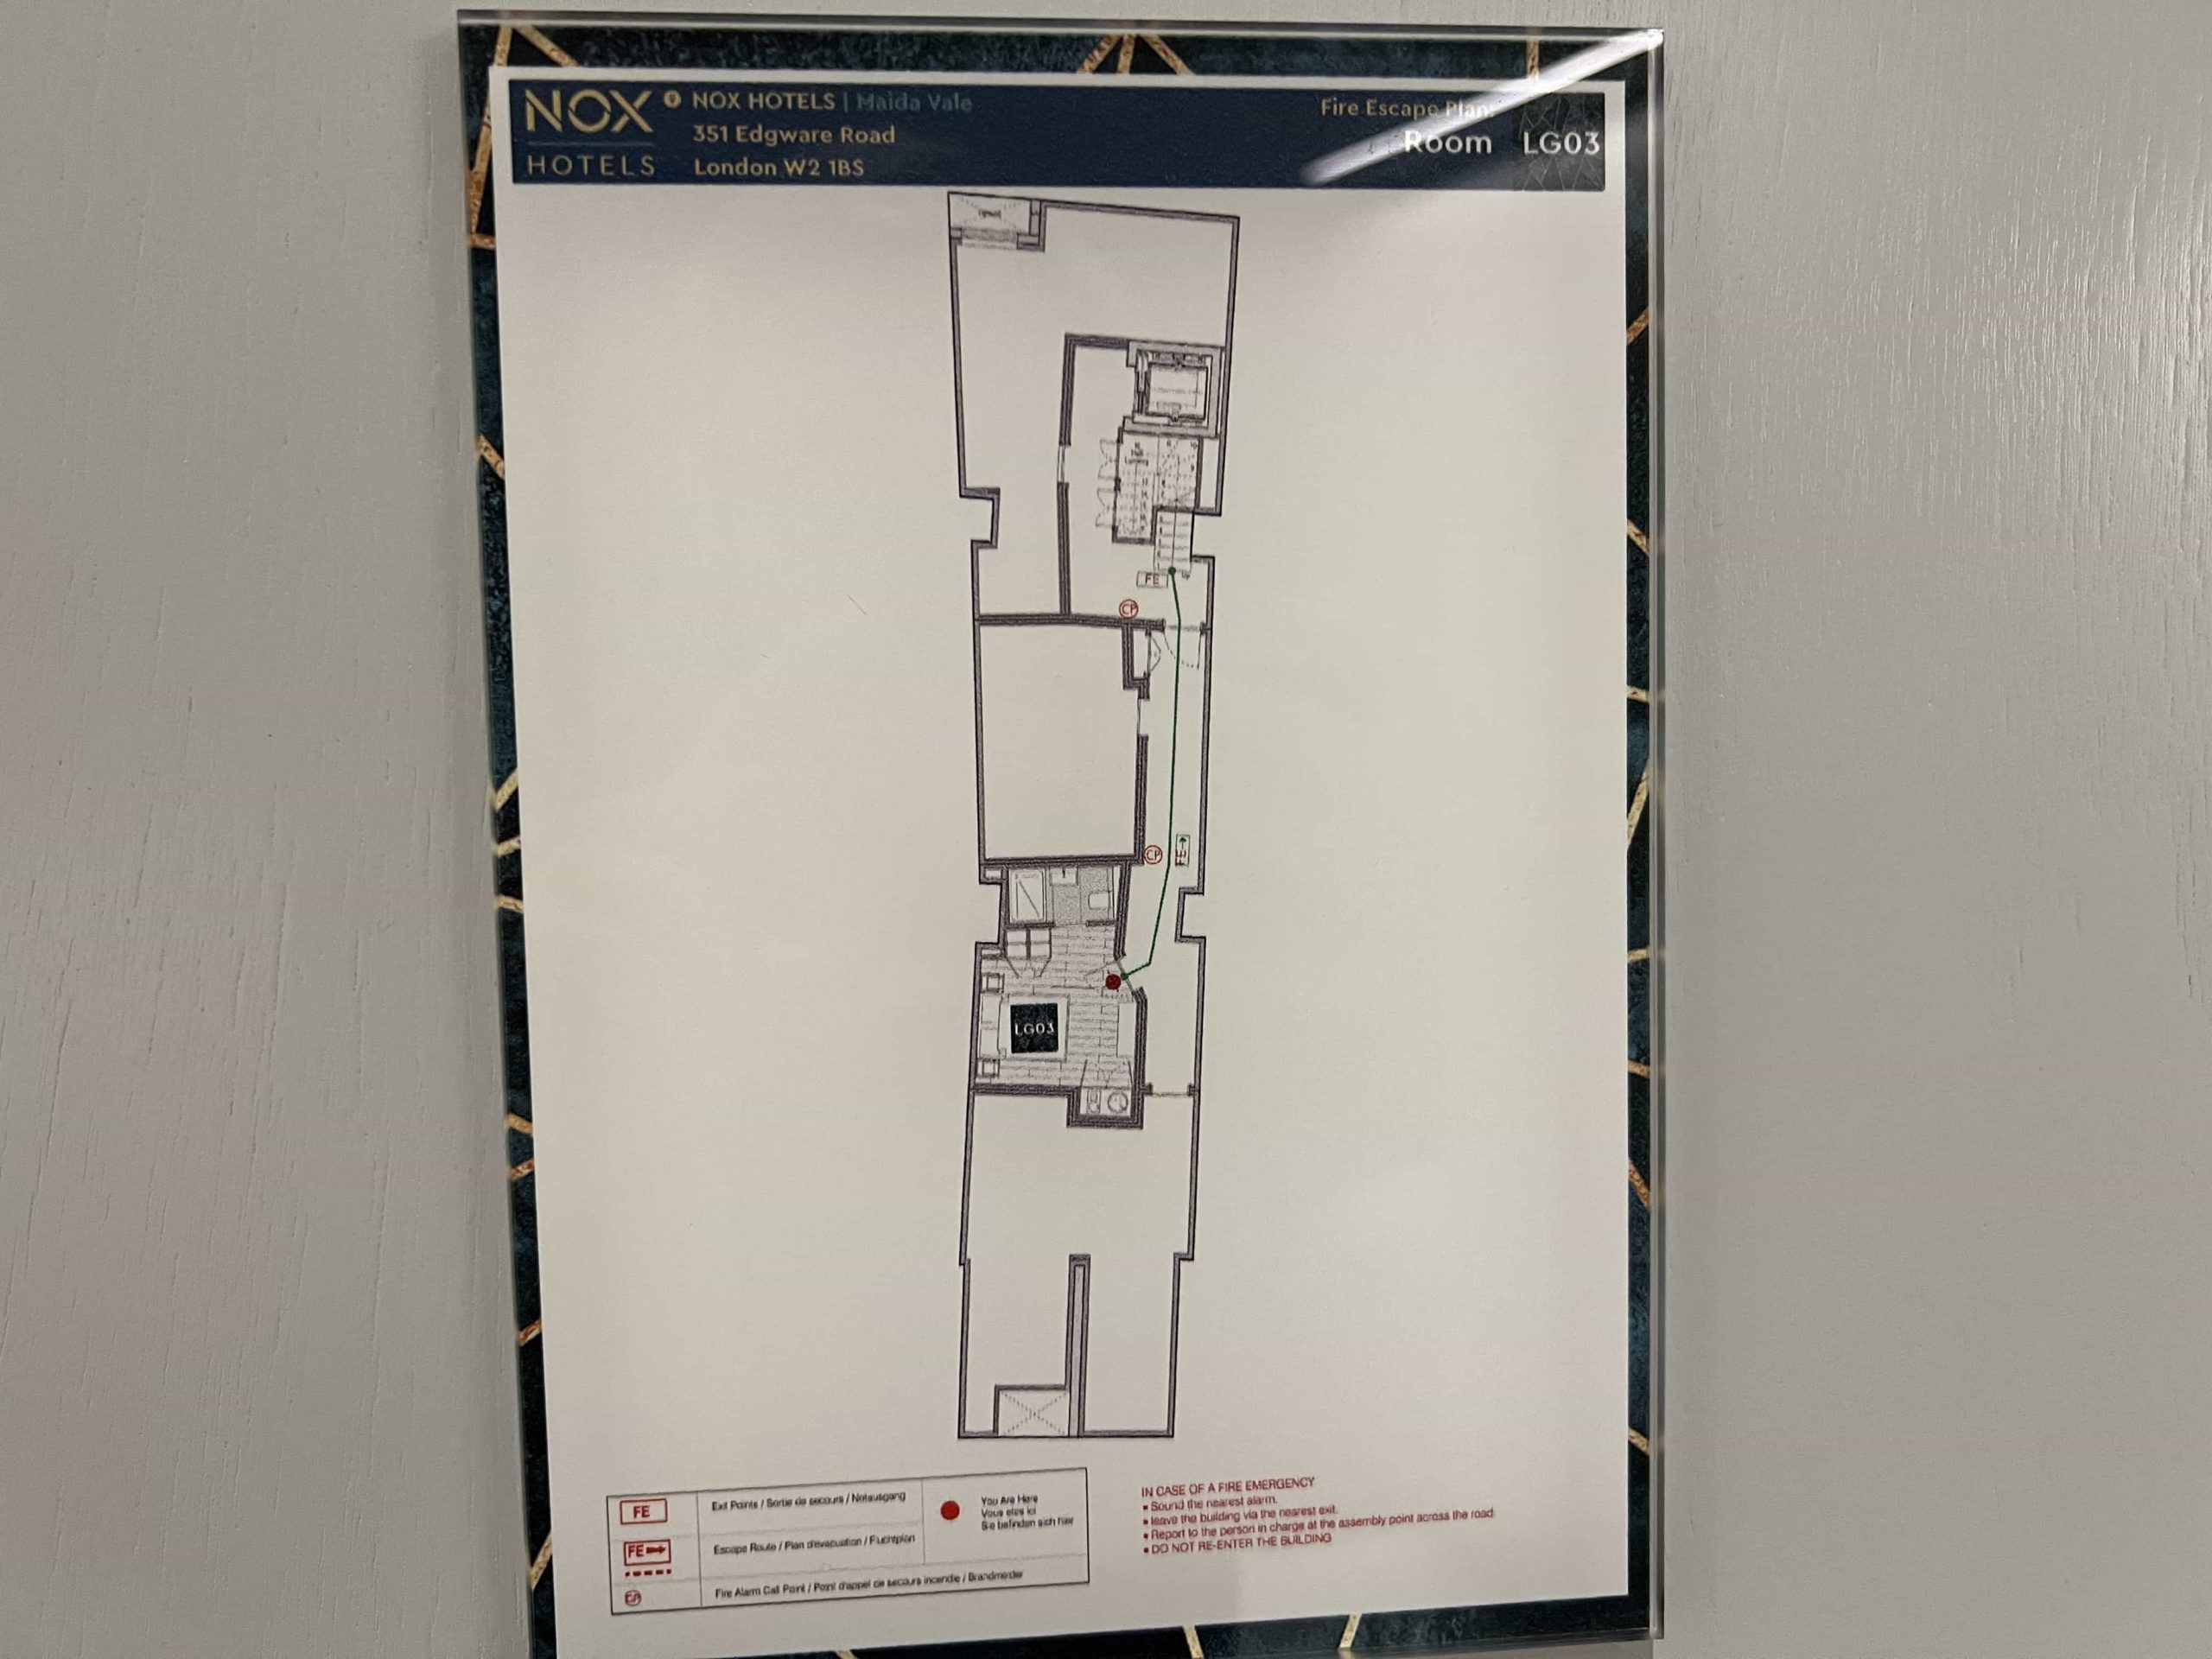 A fire escape plan on the back of a hotel room door